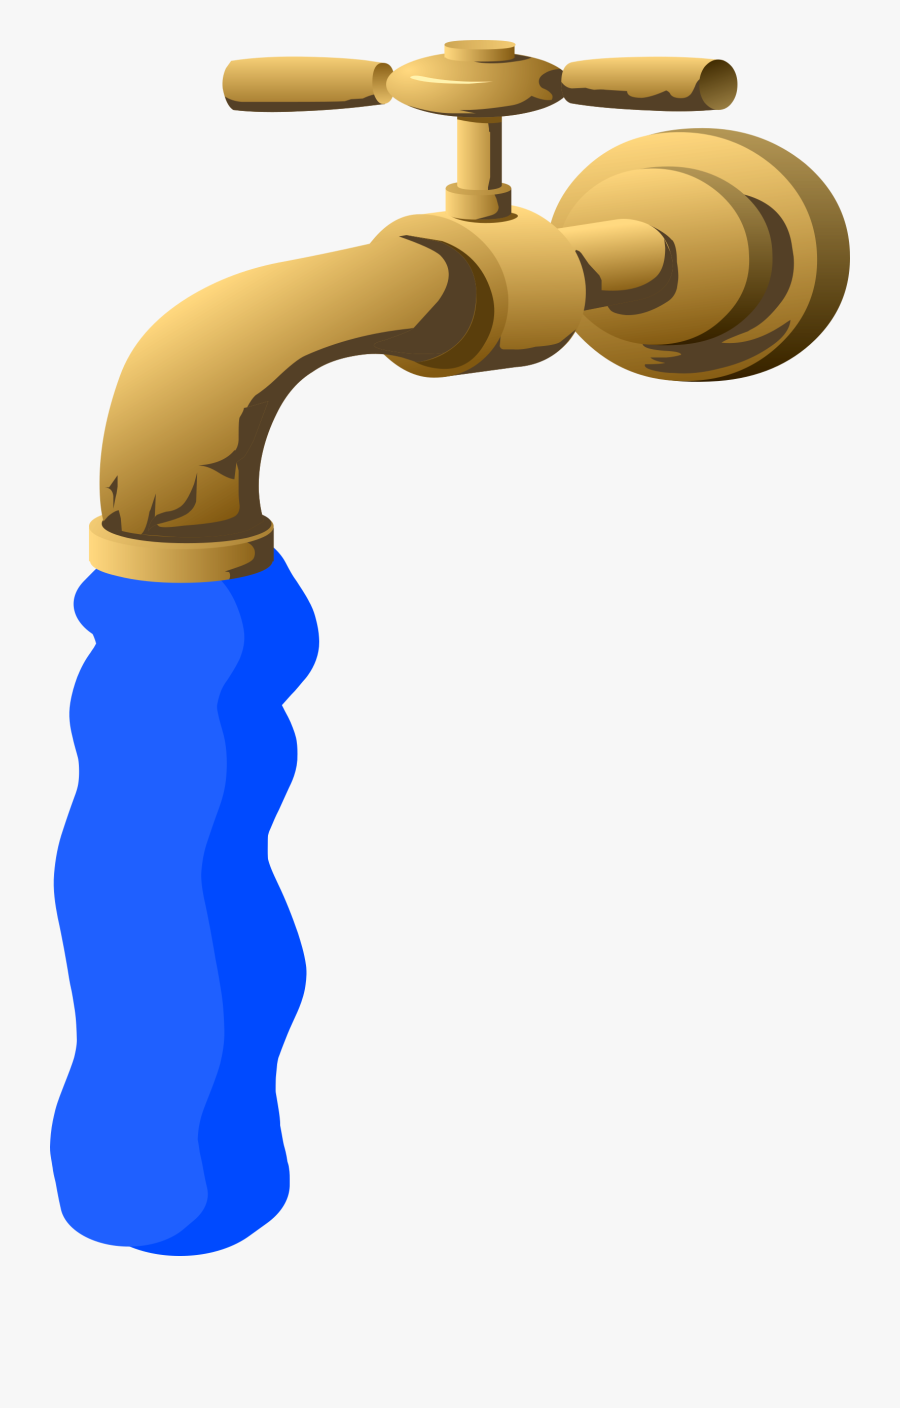 River Clipart At Getdrawings - Brass Faucet Clipart, Transparent Clipart